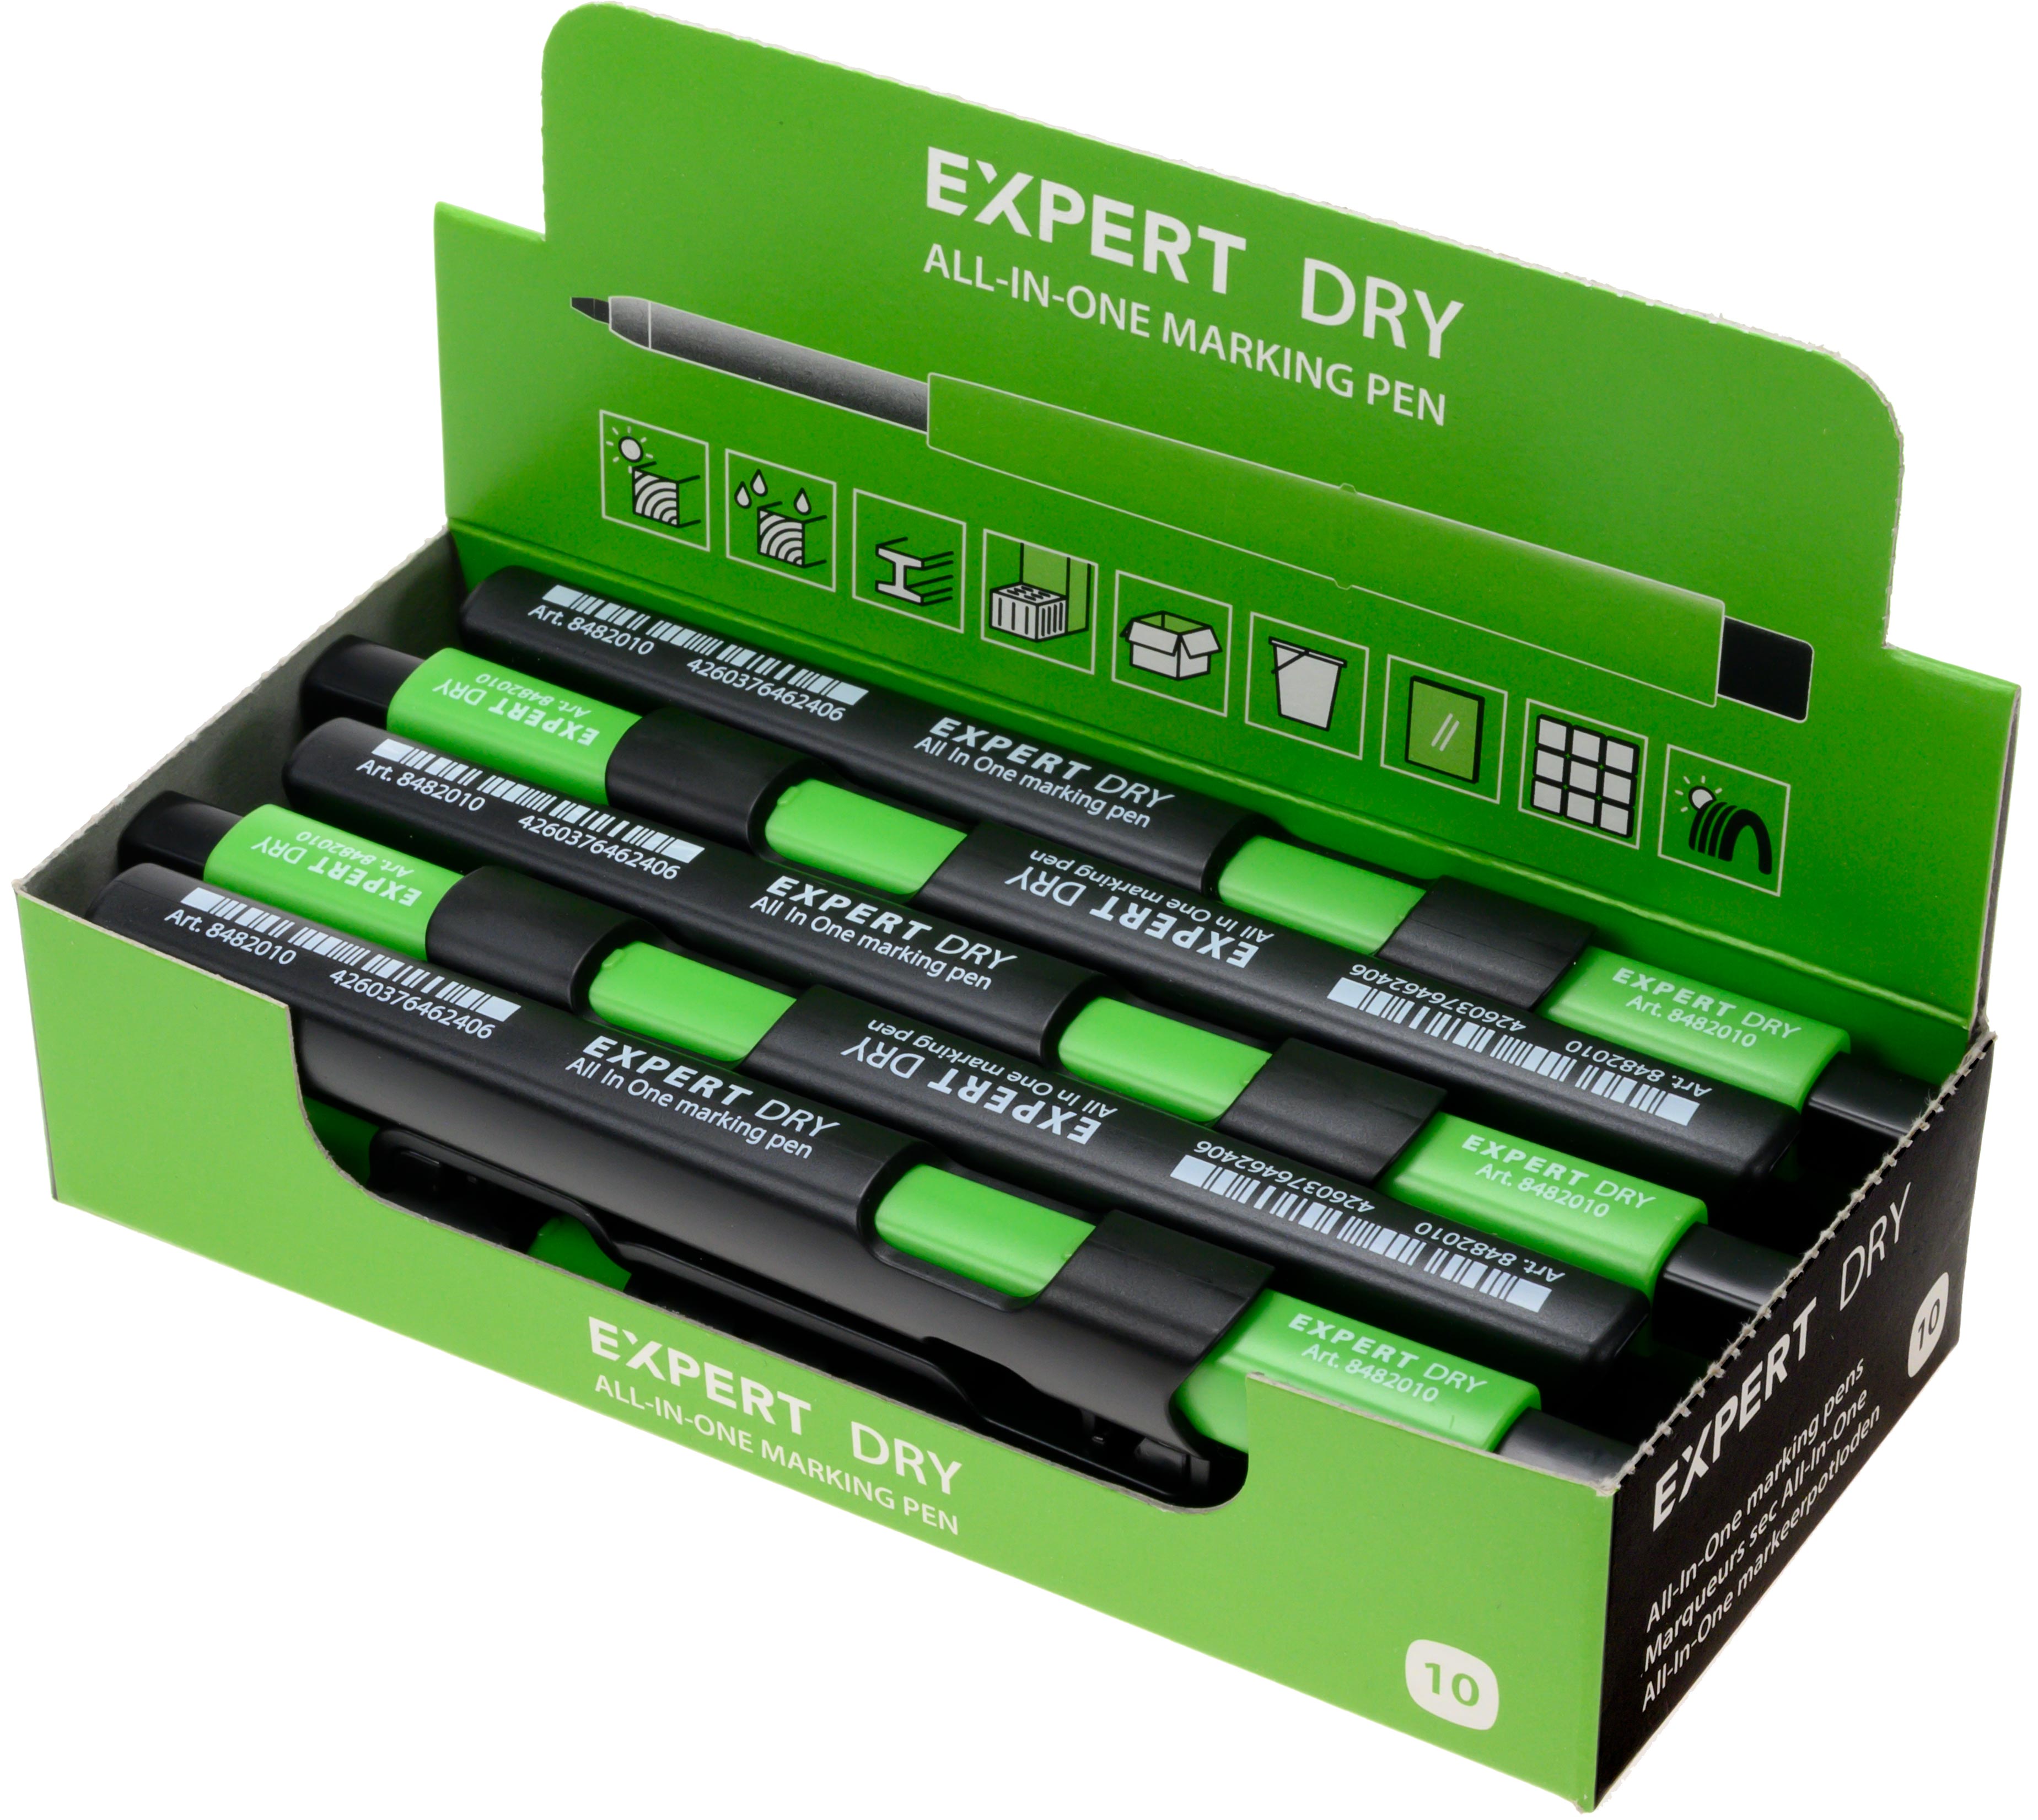 EXPERT DRY ALL-IN-ONE marking pen 